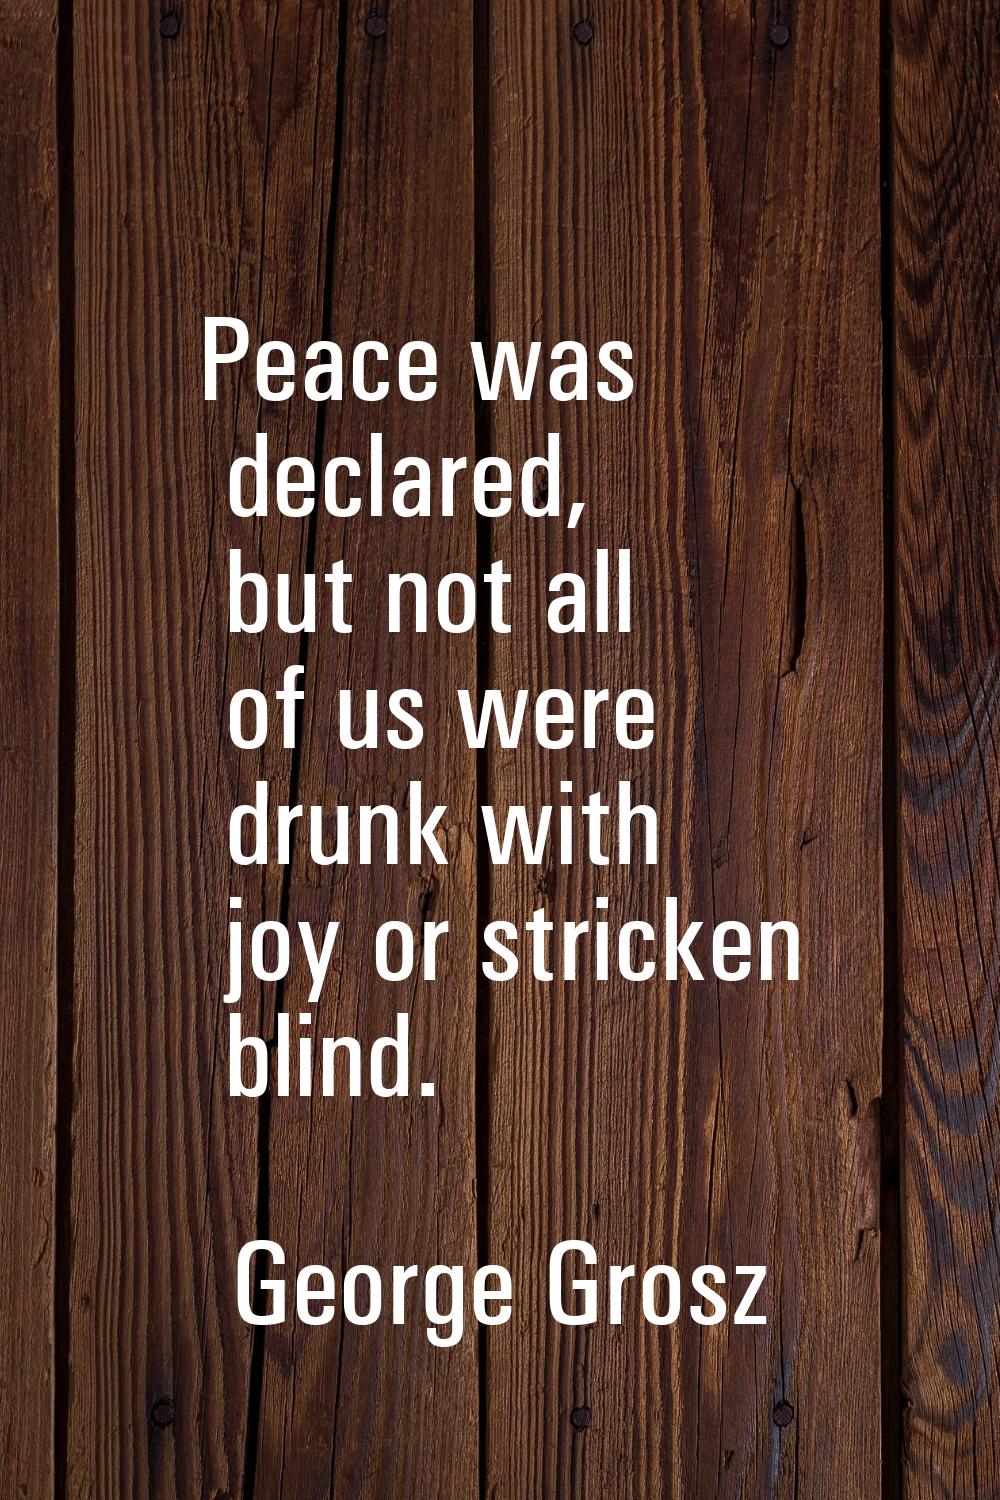 Peace was declared, but not all of us were drunk with joy or stricken blind.